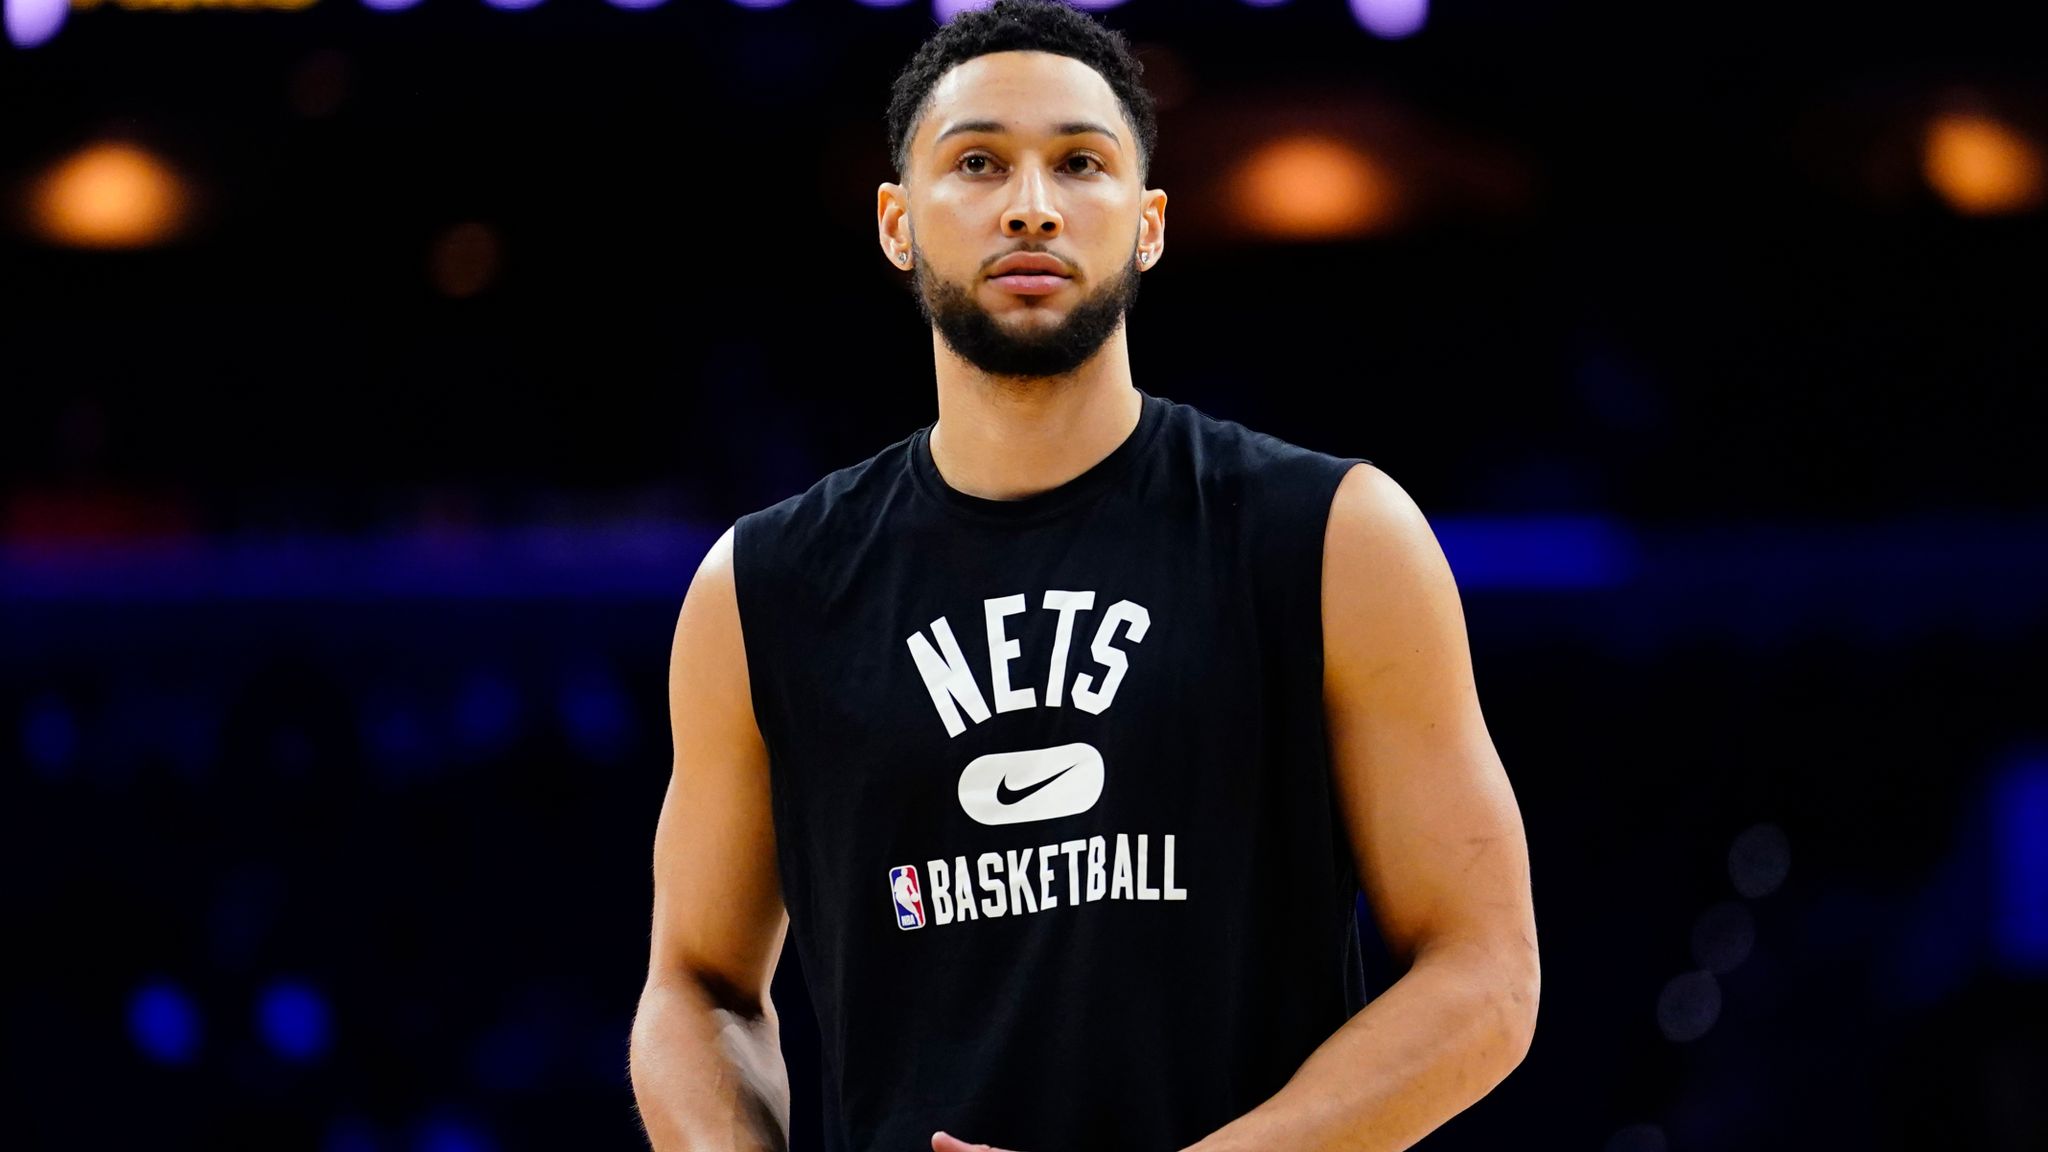 Sixers fans boo Ben Simmons as he returns to Philly with Brooklyn Nets